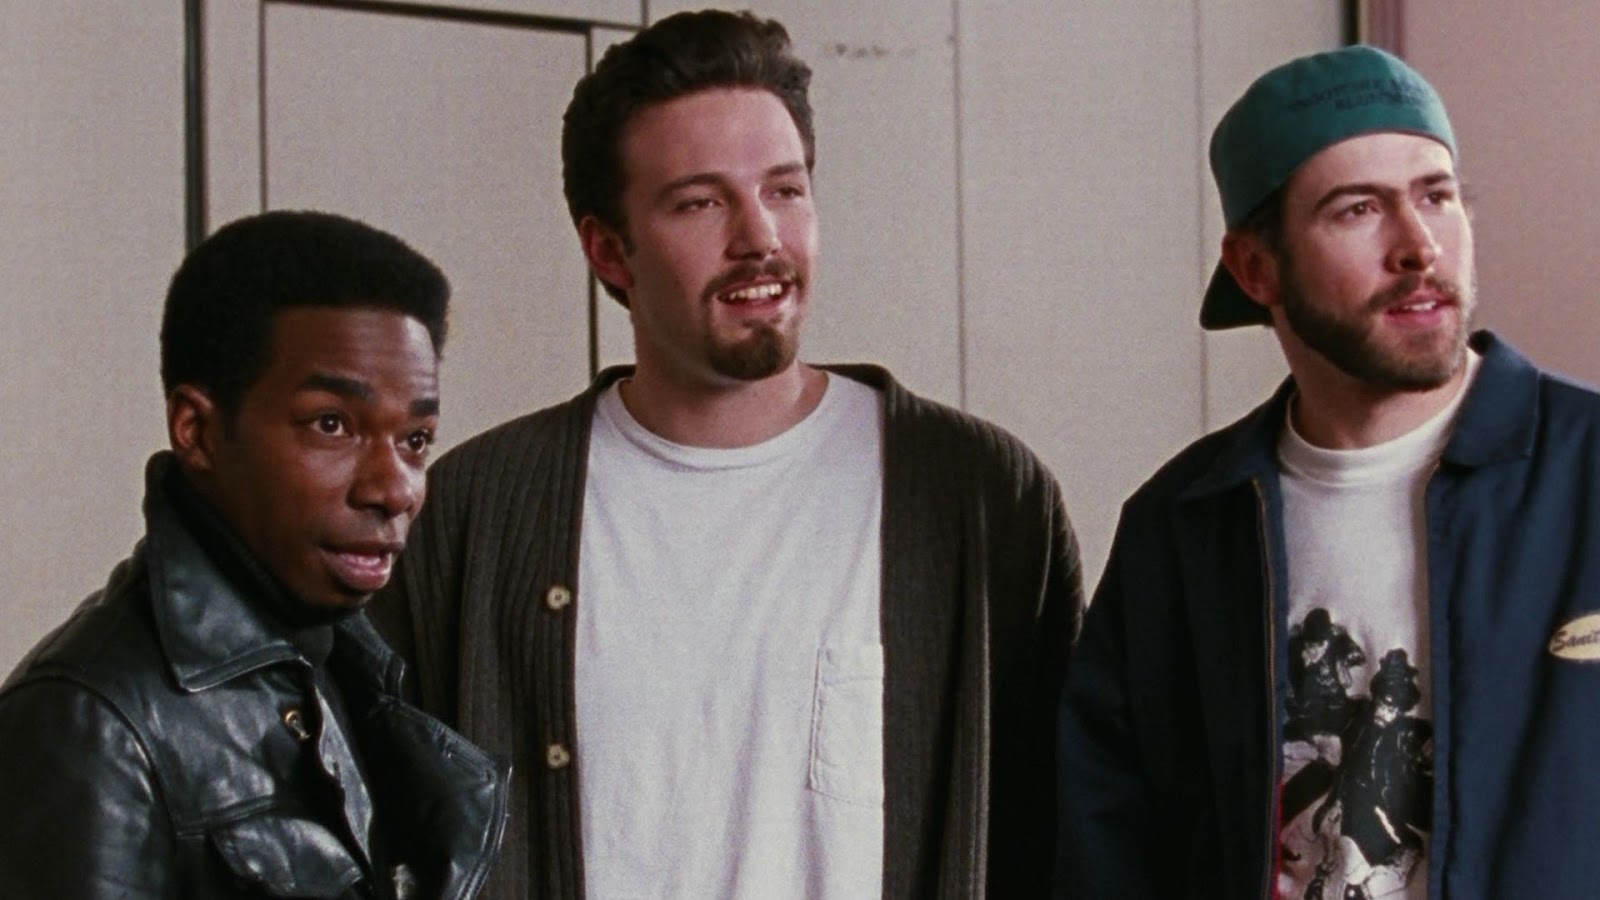 Chasing Amy Backgrounds, Compatible - PC, Mobile, Gadgets| 1600x900 px